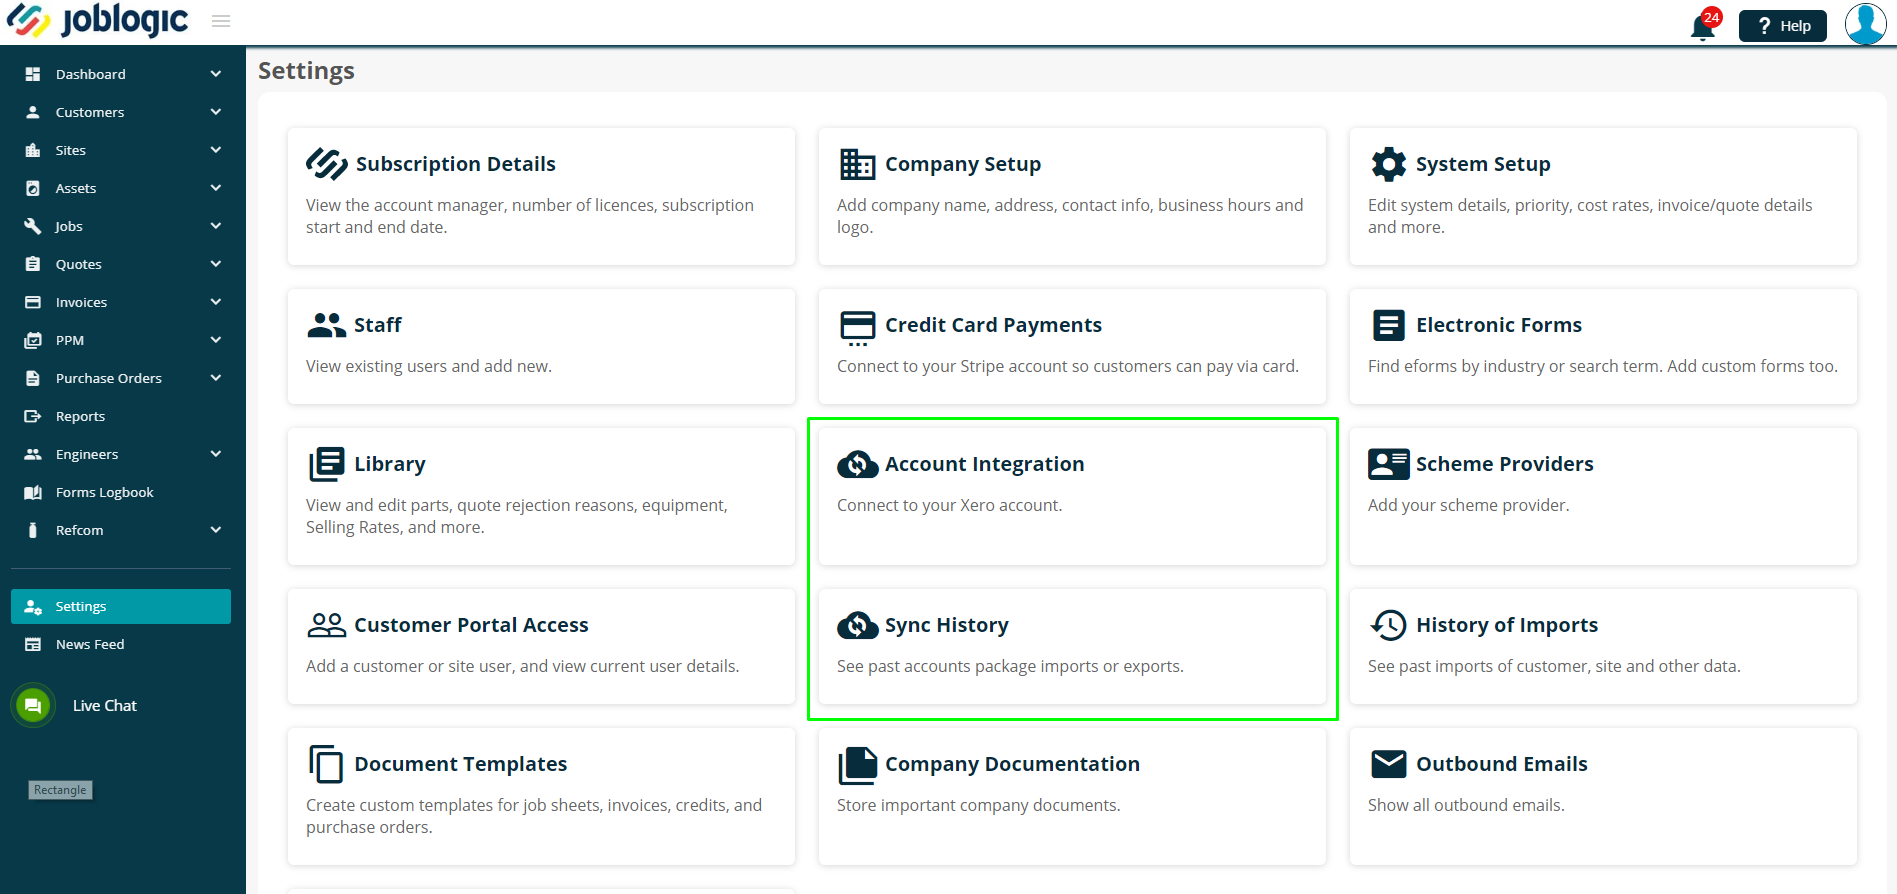 Screenshot of Joblogic software - ‘Account Integration’ and ‘Sync History’ highlighted on Settings page